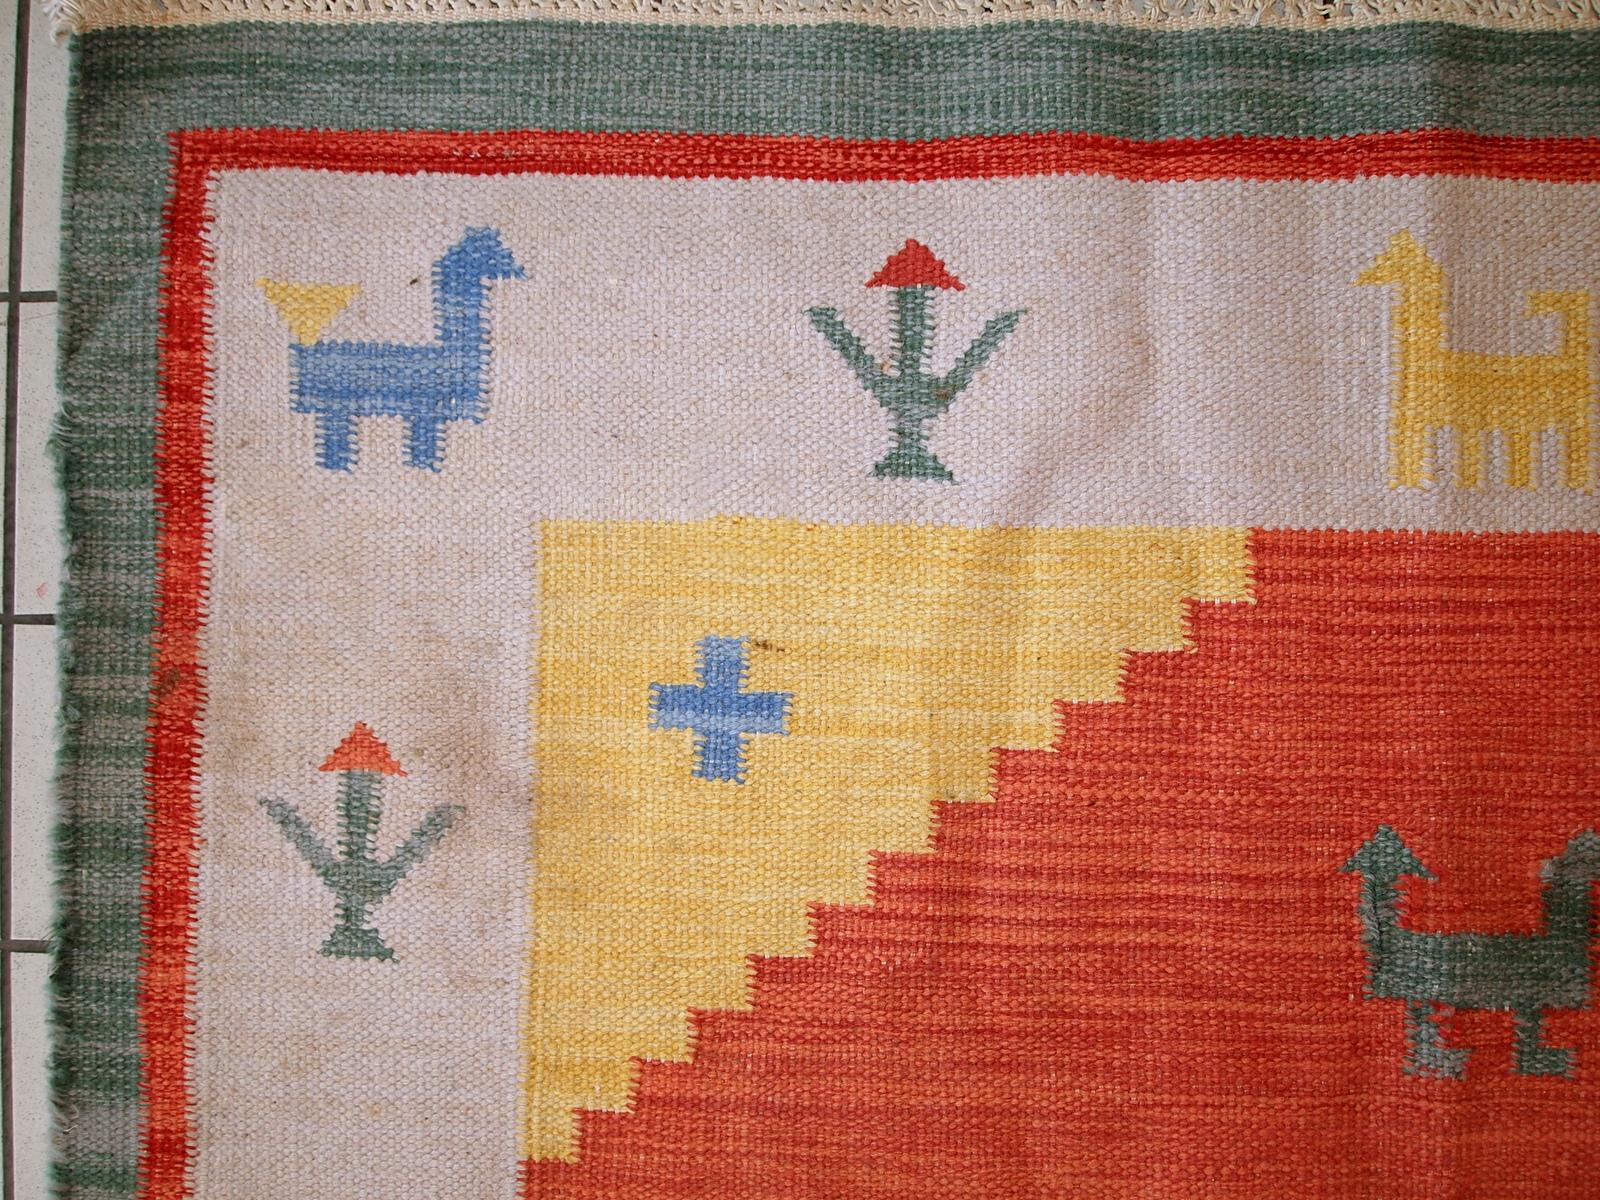 Vintage kilim in bright shades of red, sky blue, beige and yellow. One side of the kilim has some age wear, but generally it is in original good condition.

- Condition: original, one side has some age wear,

- circa 1960s,

- Size: 5.6' x